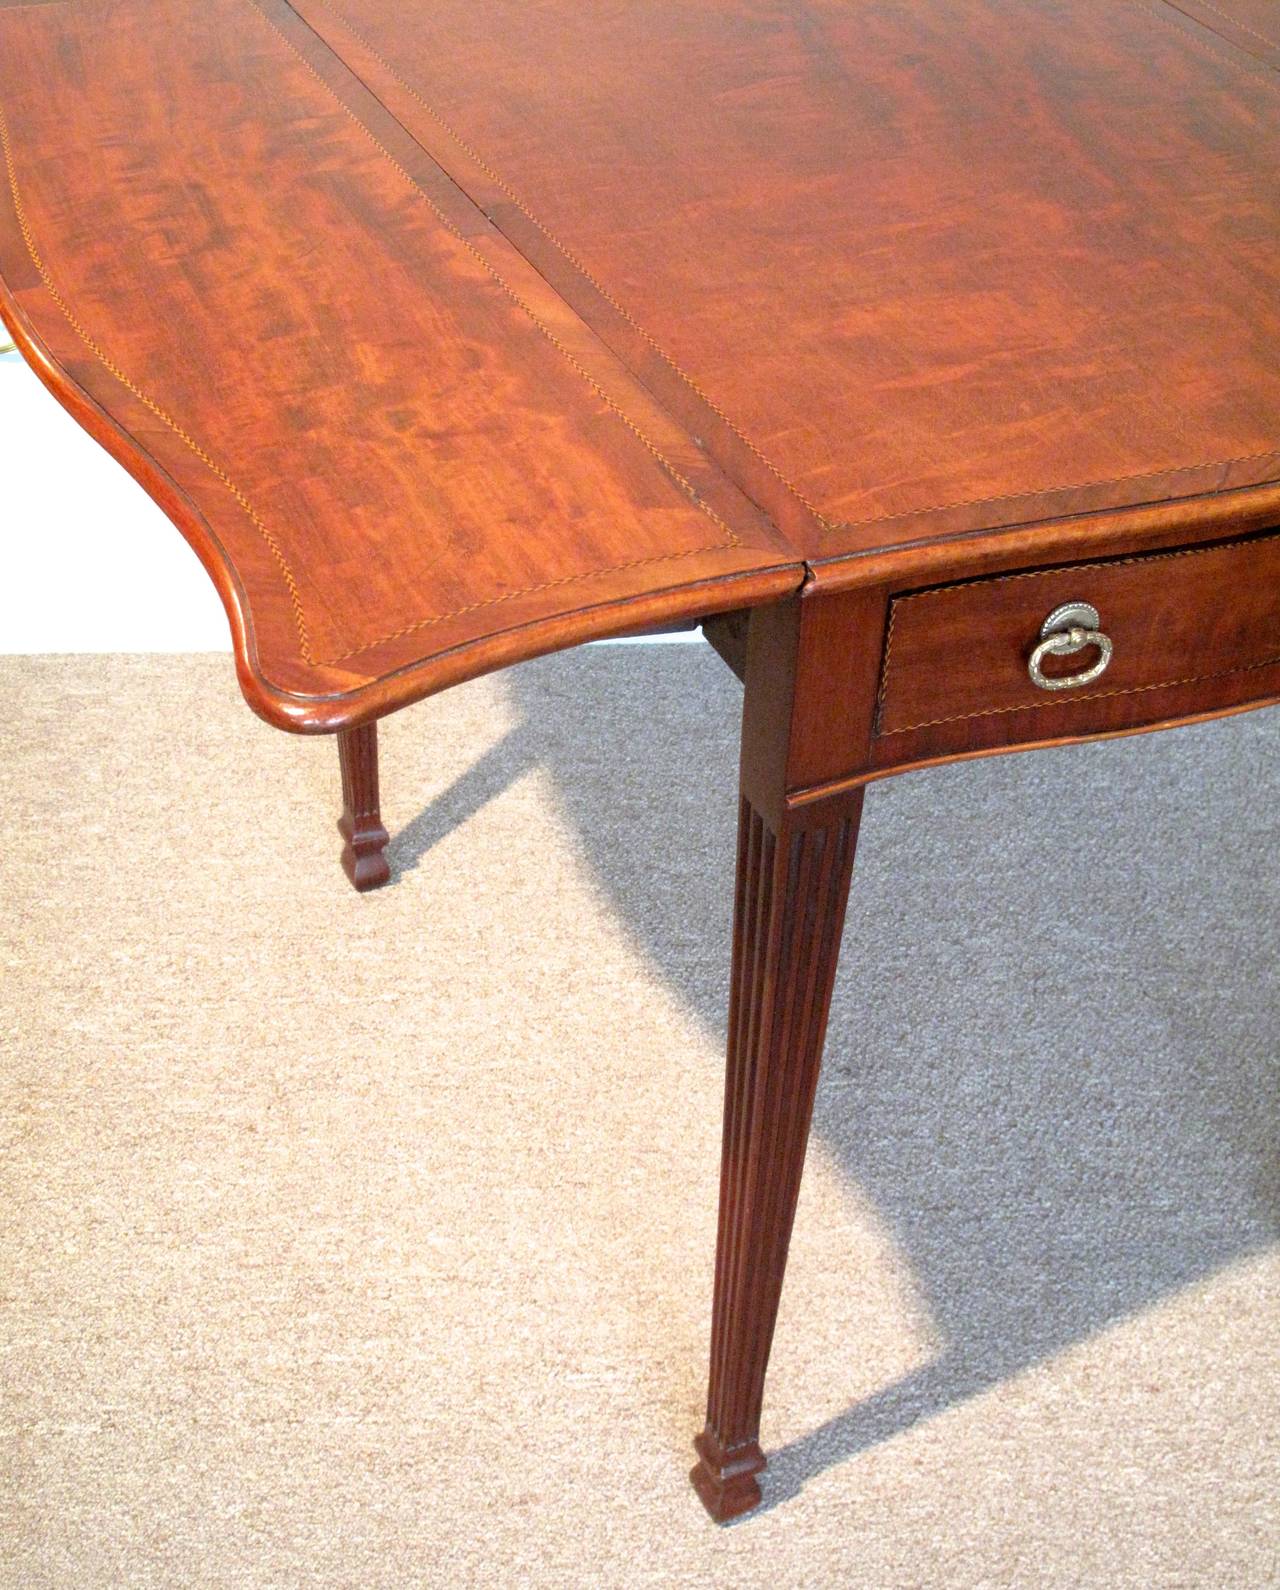 George III Serpentine Inlaid Mahogany Pembroke Table, 18th Century For Sale 5